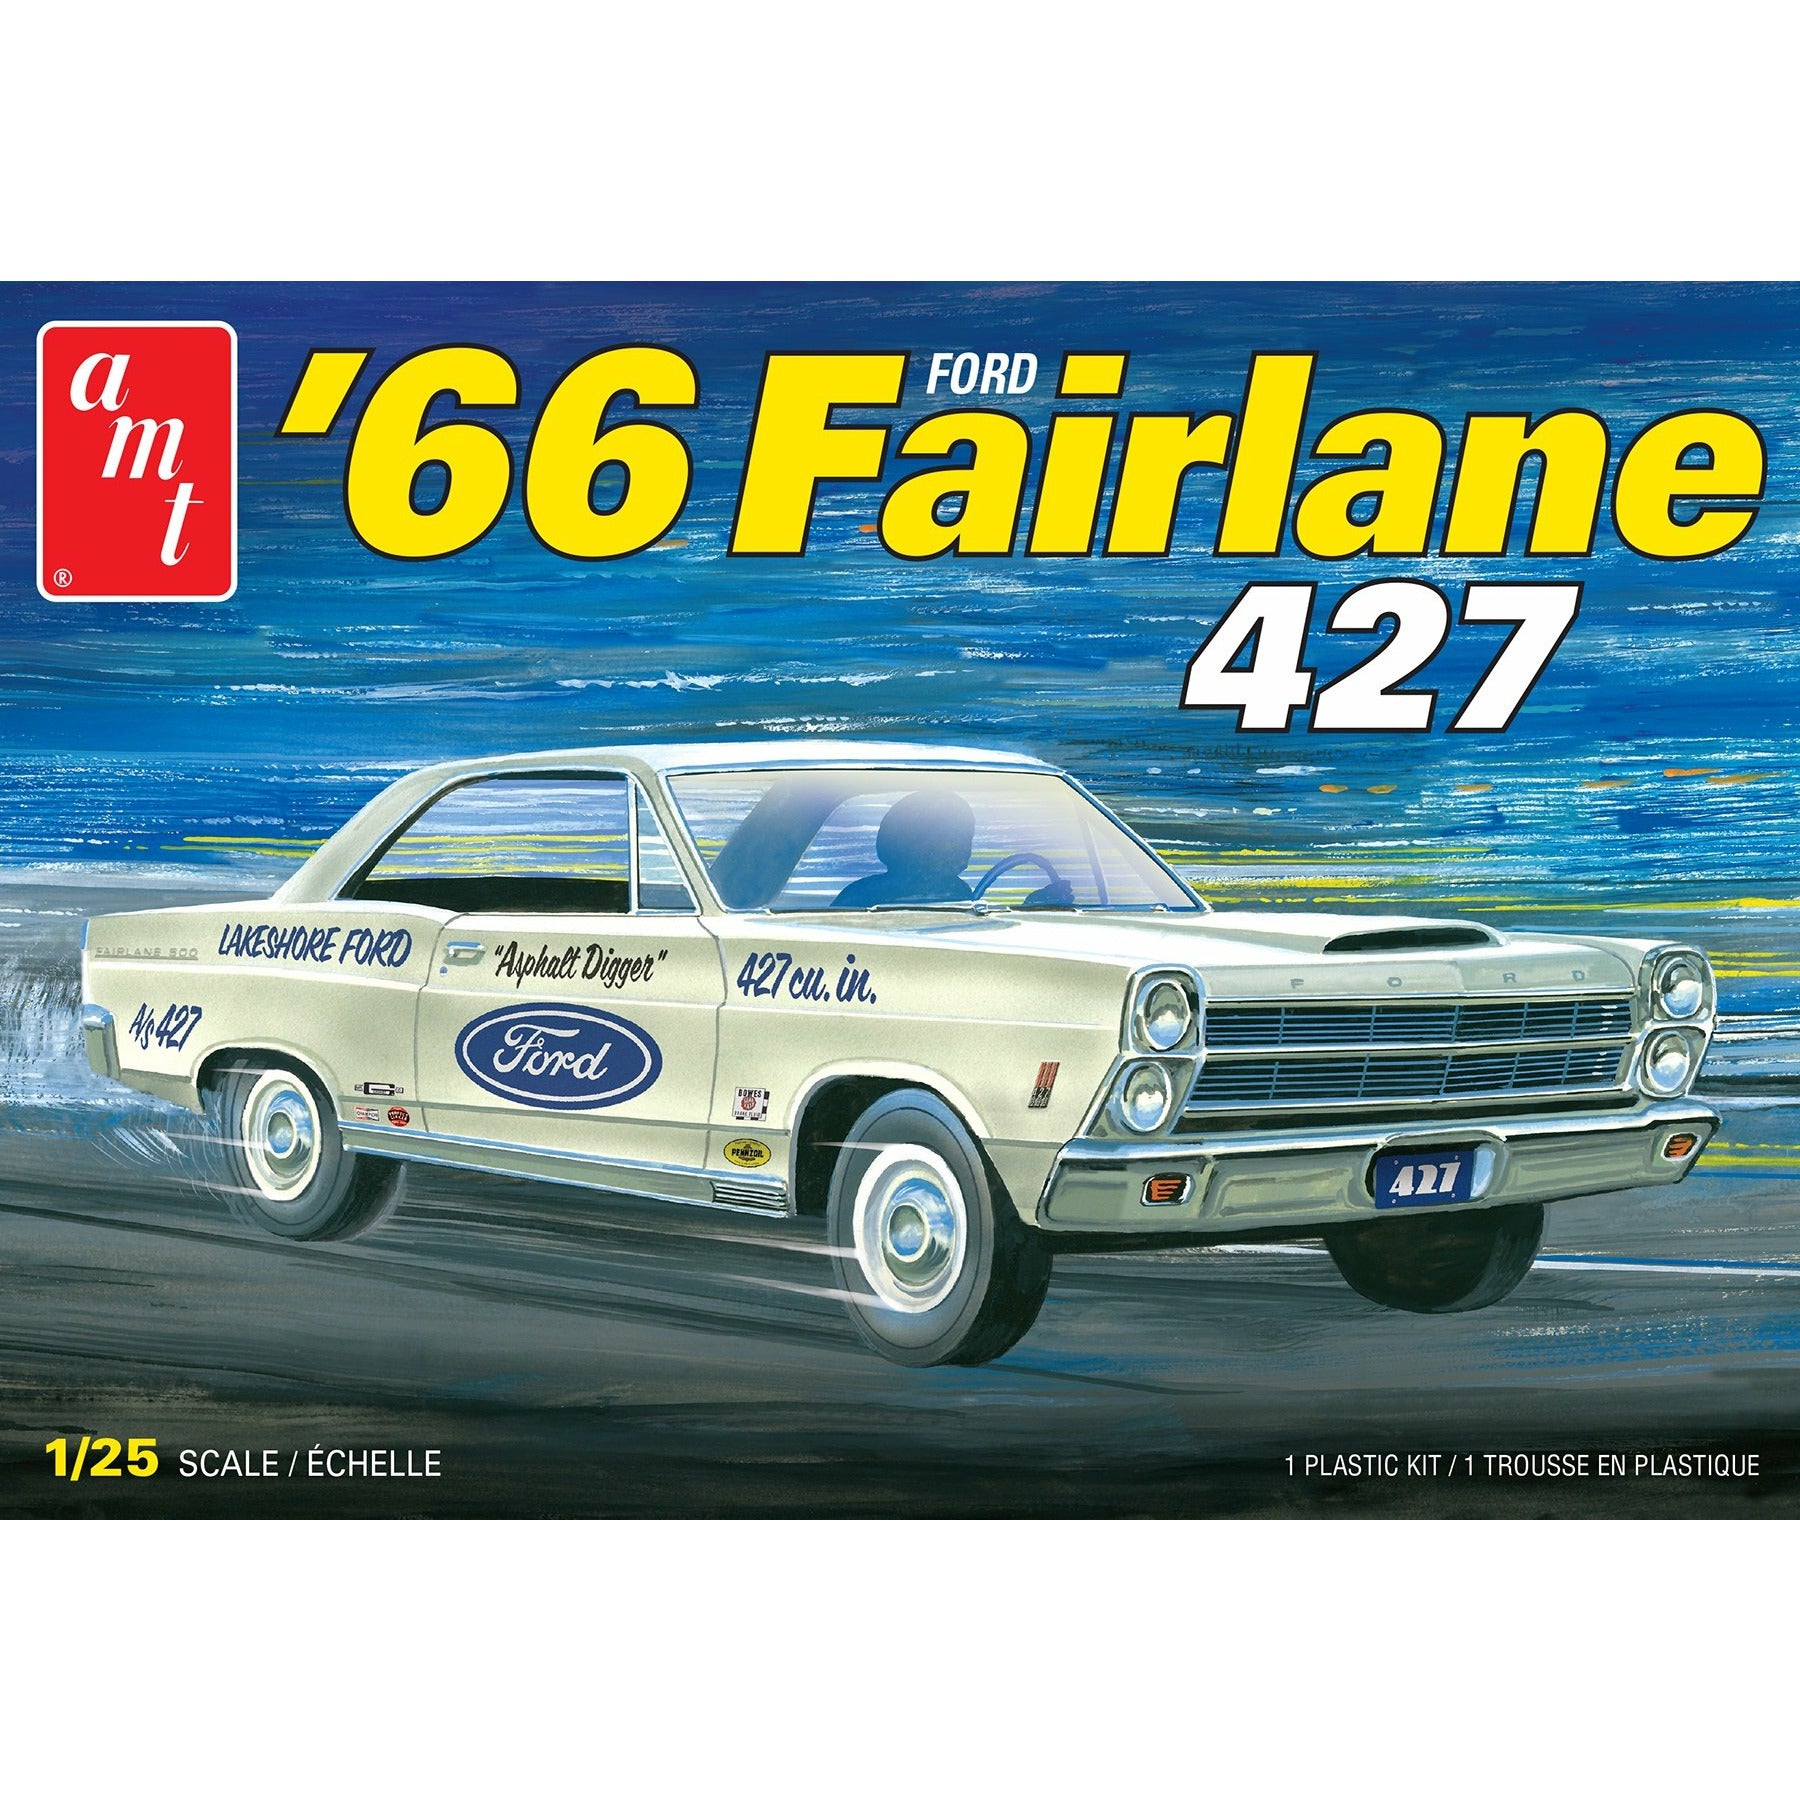 1966 Ford Fairlane 427 1/25 Model Car Kit #1263M/12 by AMT